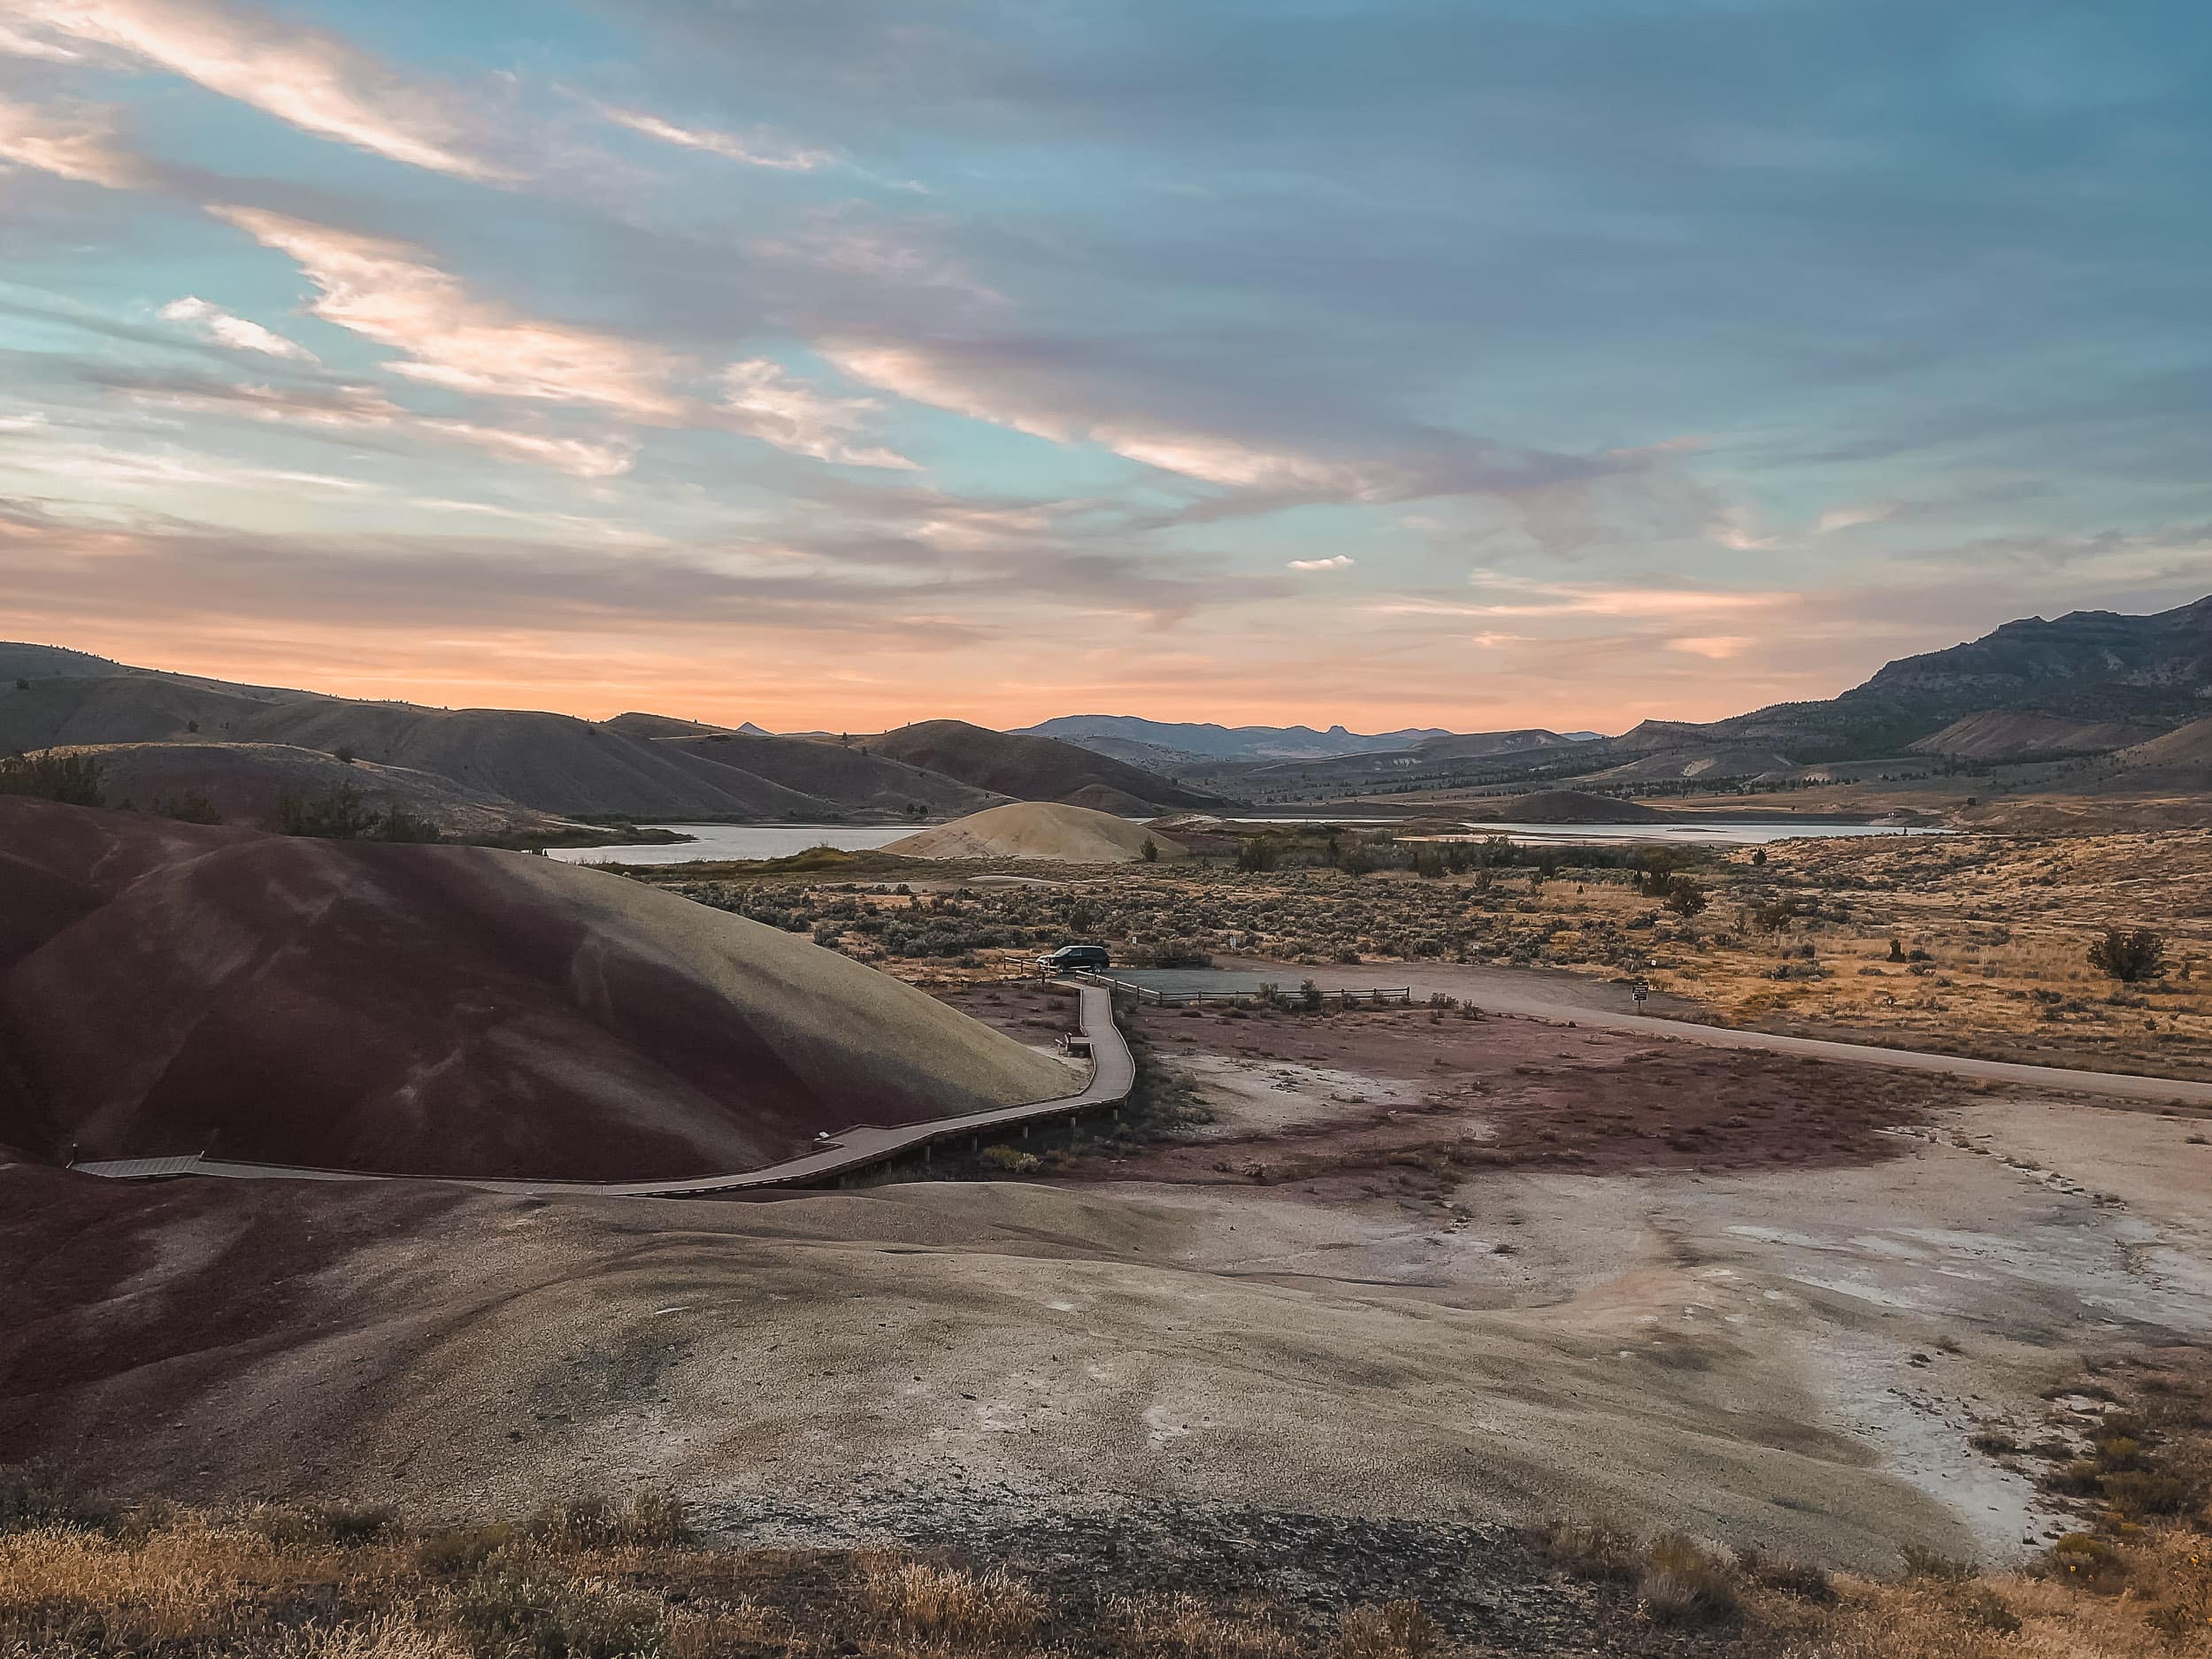 a view from the painted cove trail in Painted Hills, Oregon